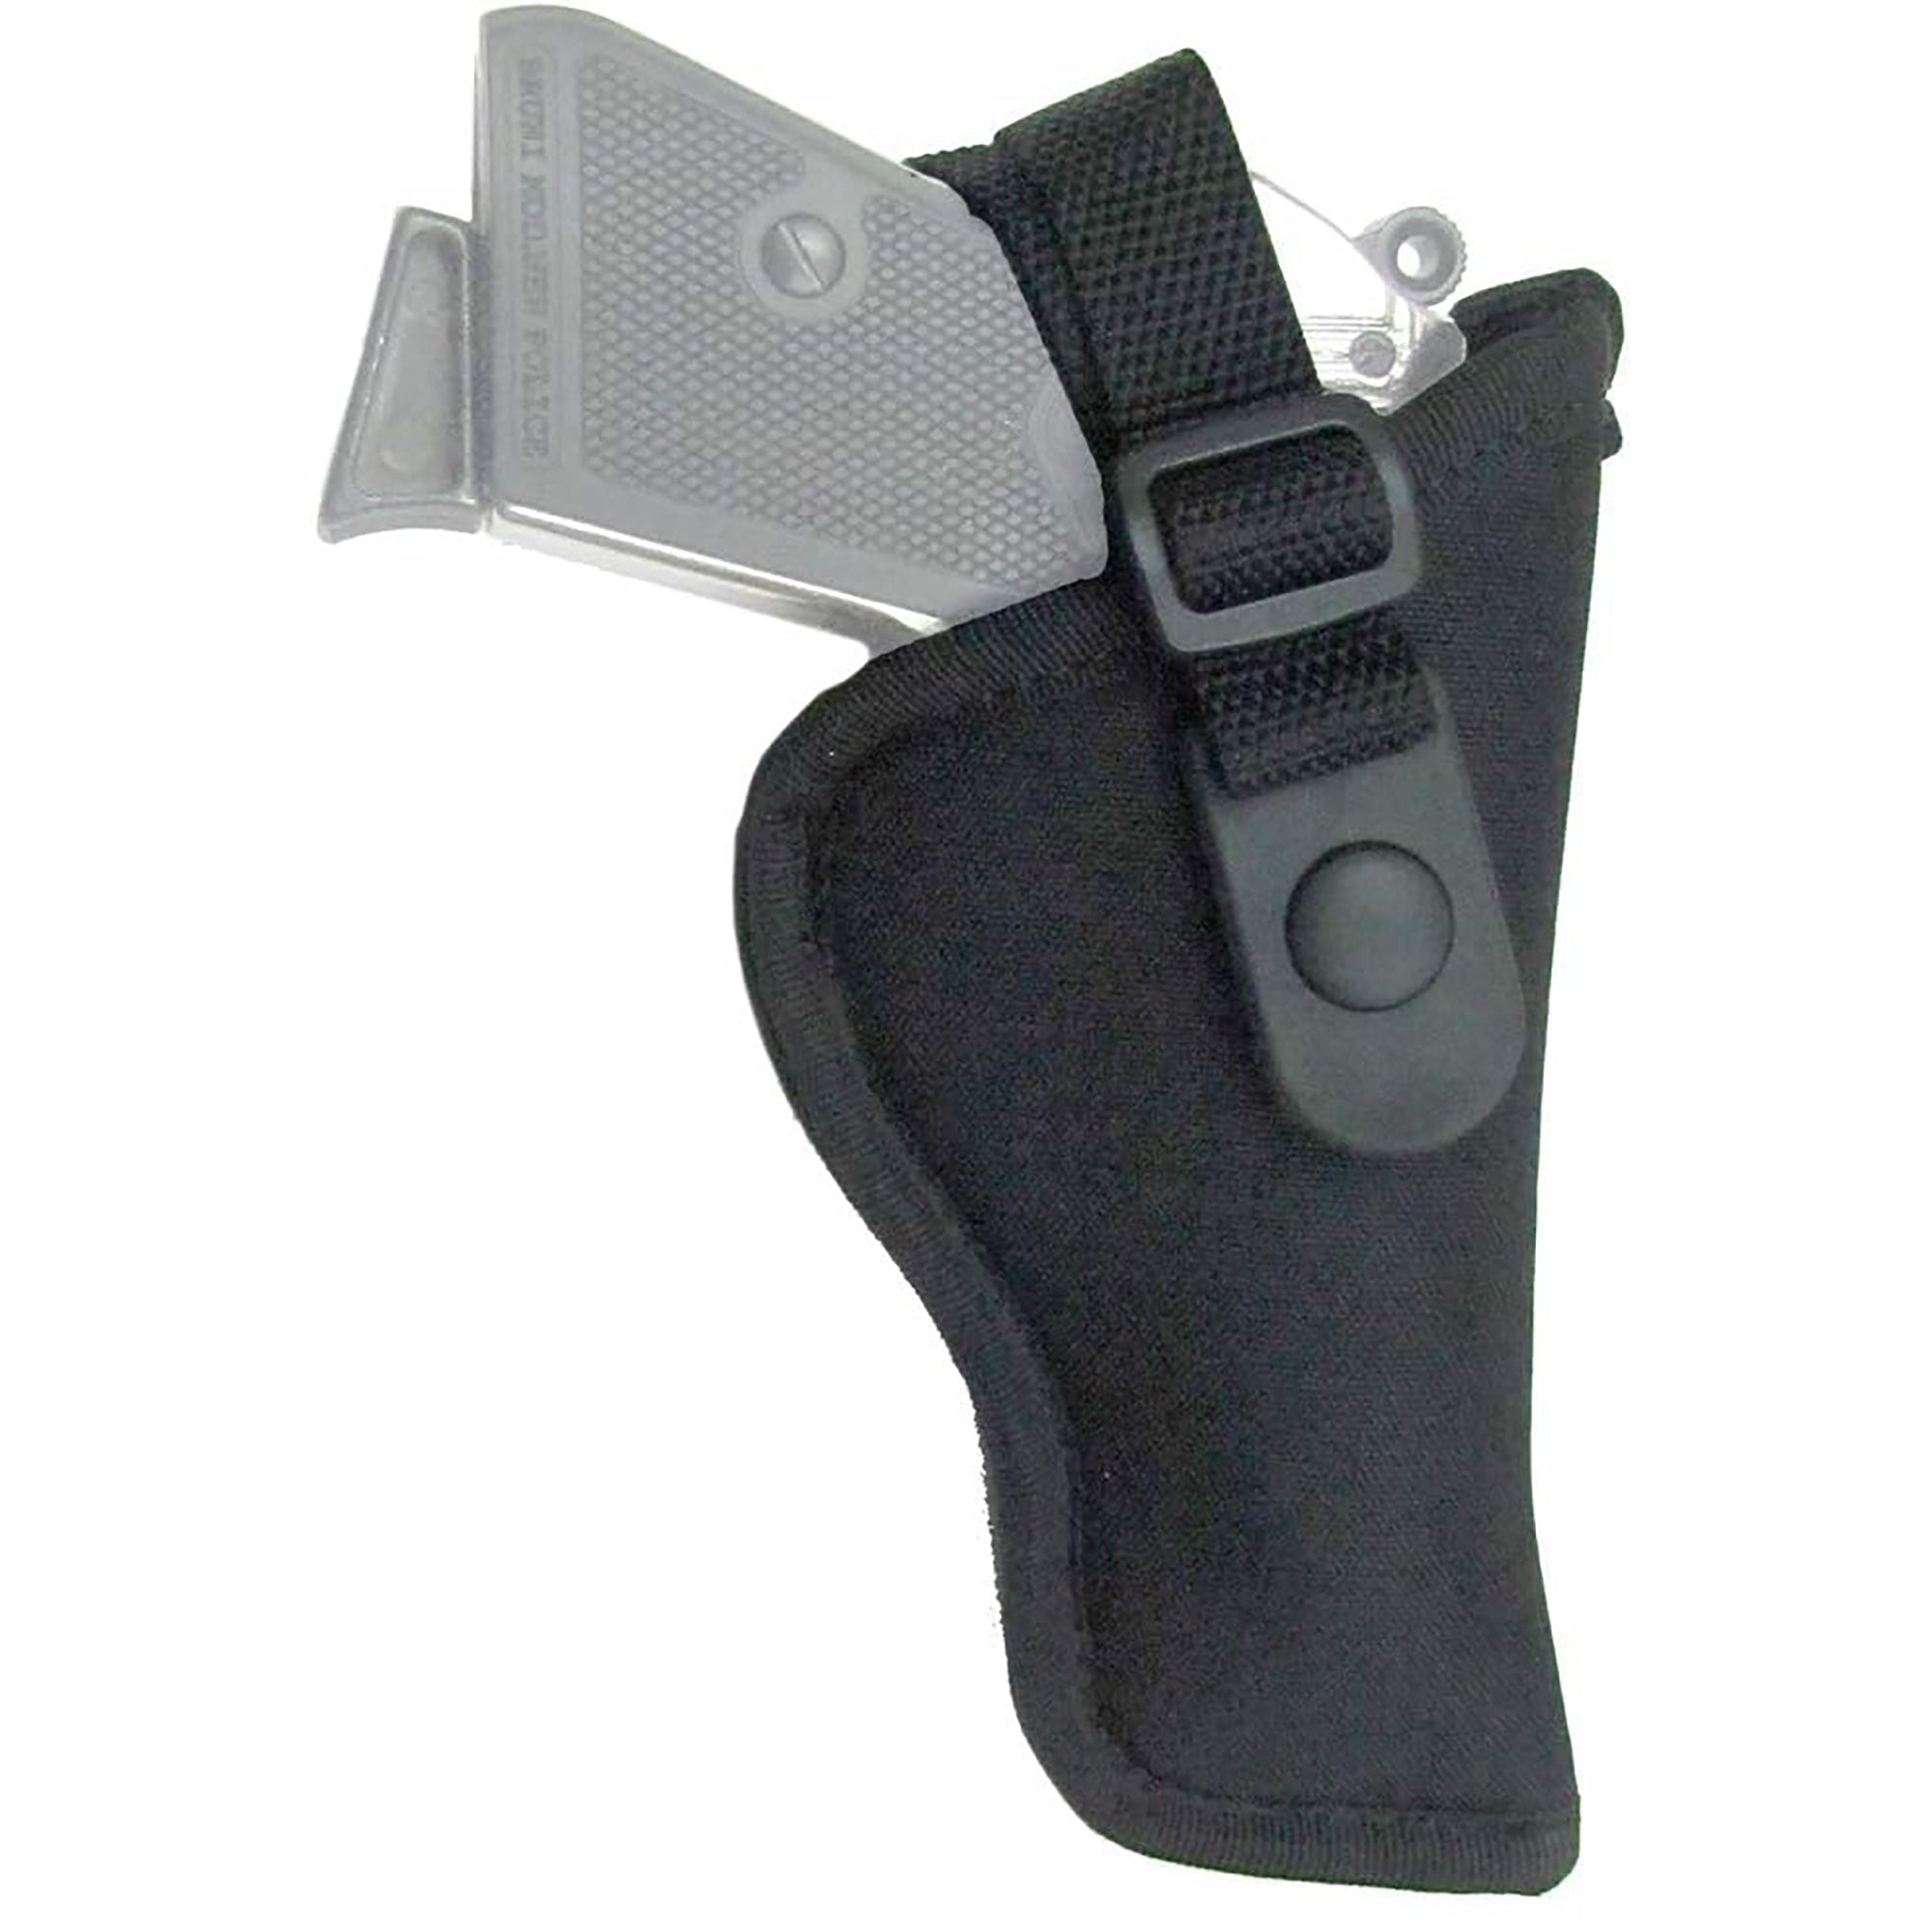 GunMate Inside-The-Pants Right-Handed Hip Holster - Size 6 - Black GunMate